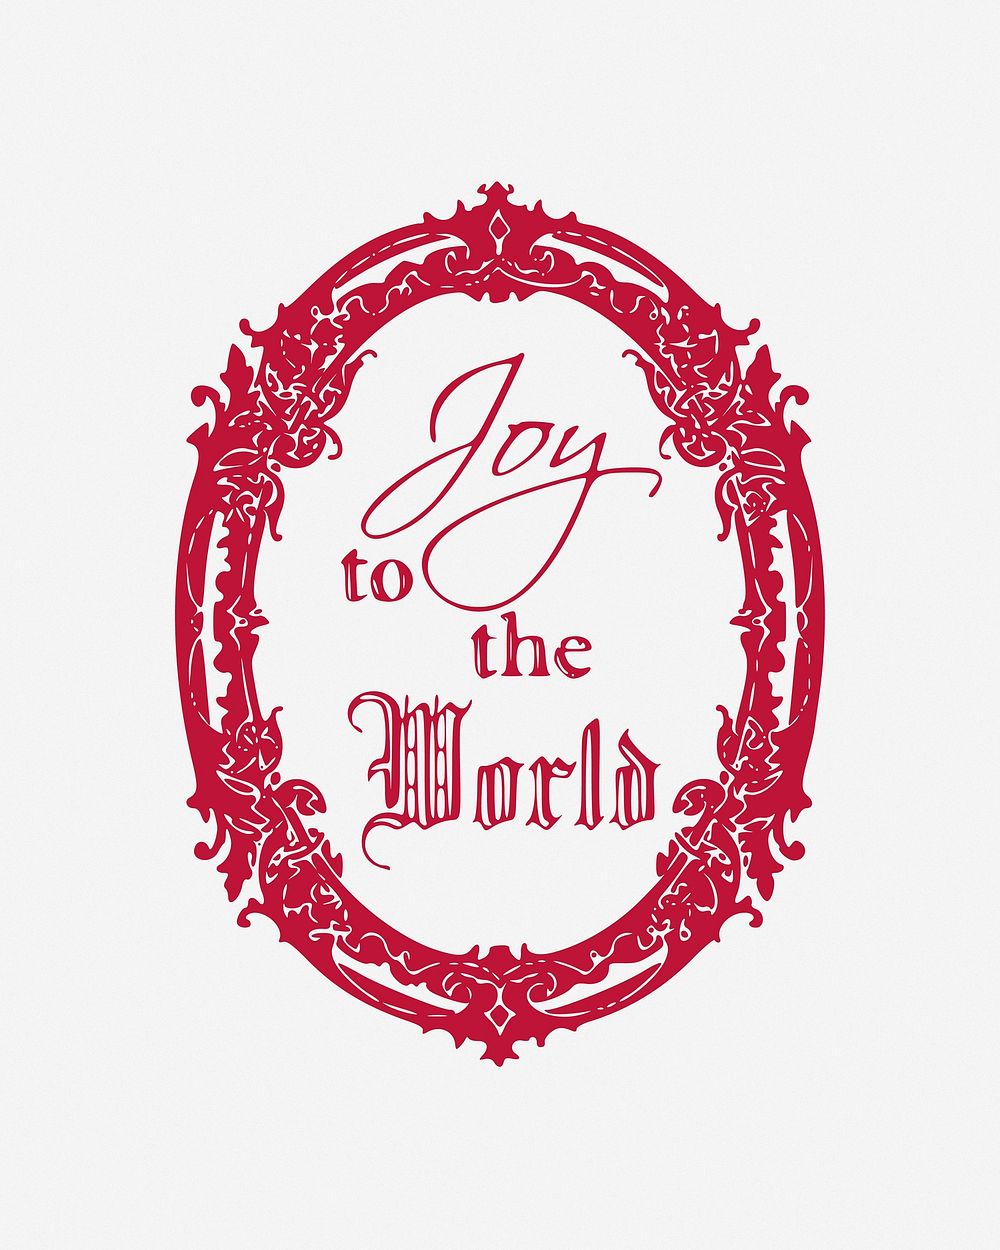 Joy to the world, message badge clipart vector. Free public domain CC0 image.